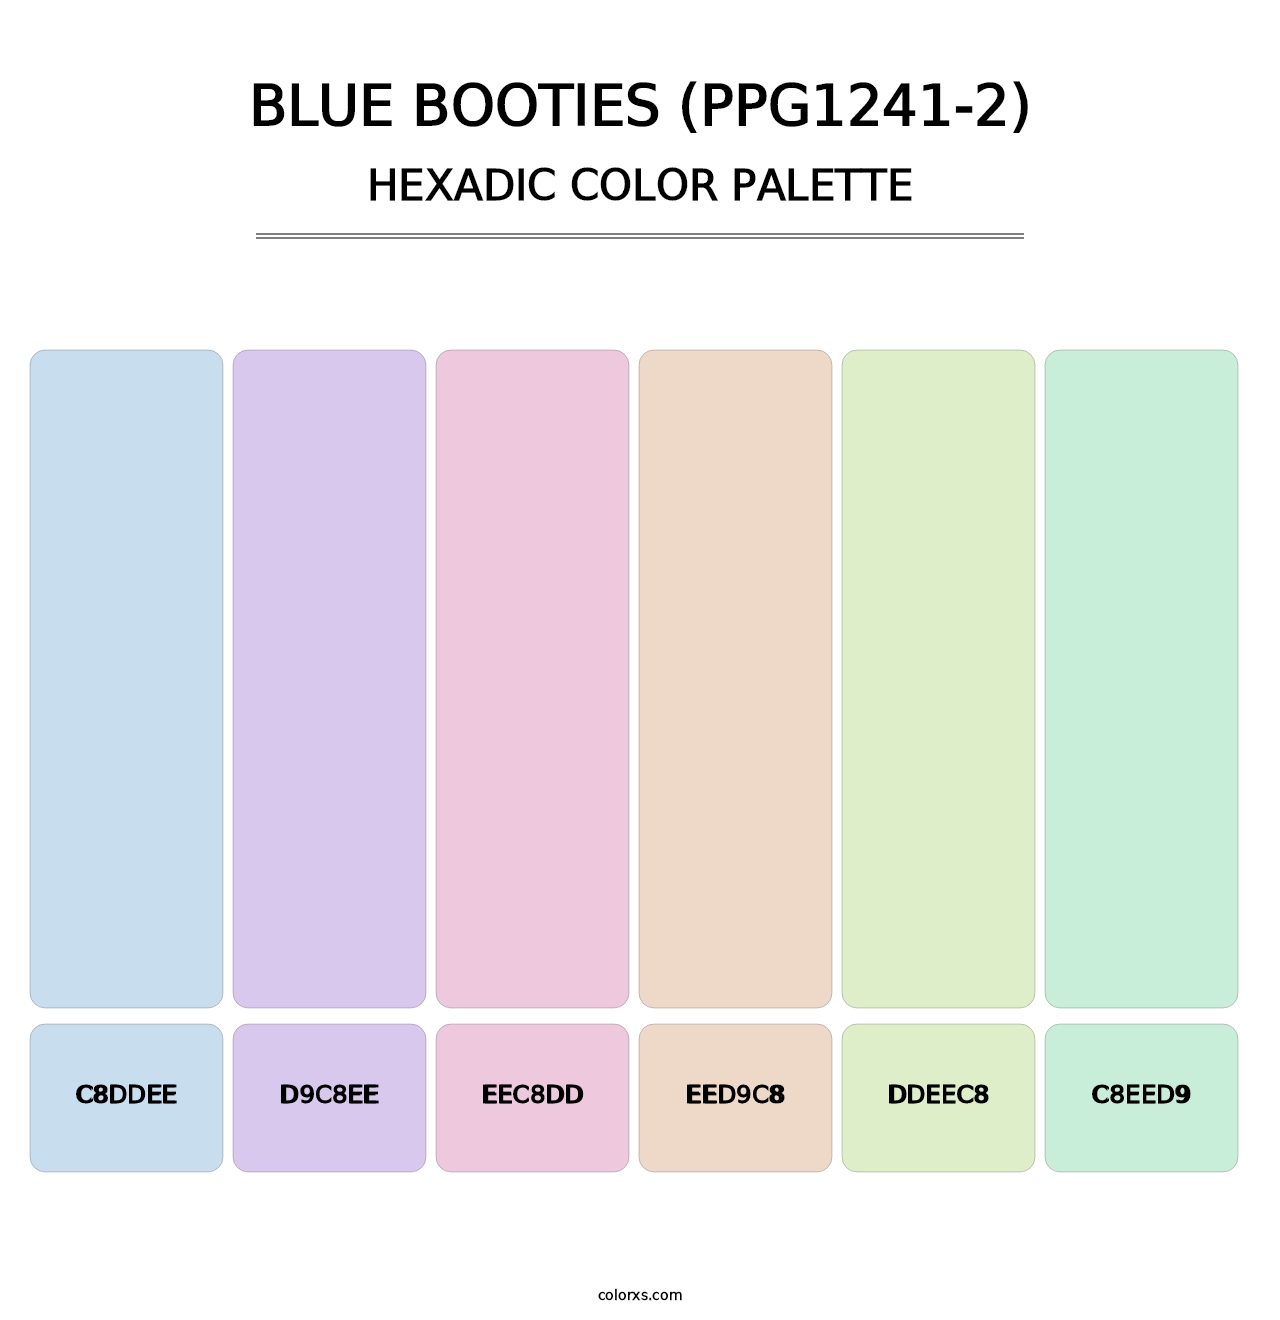 Blue Booties (PPG1241-2) - Hexadic Color Palette